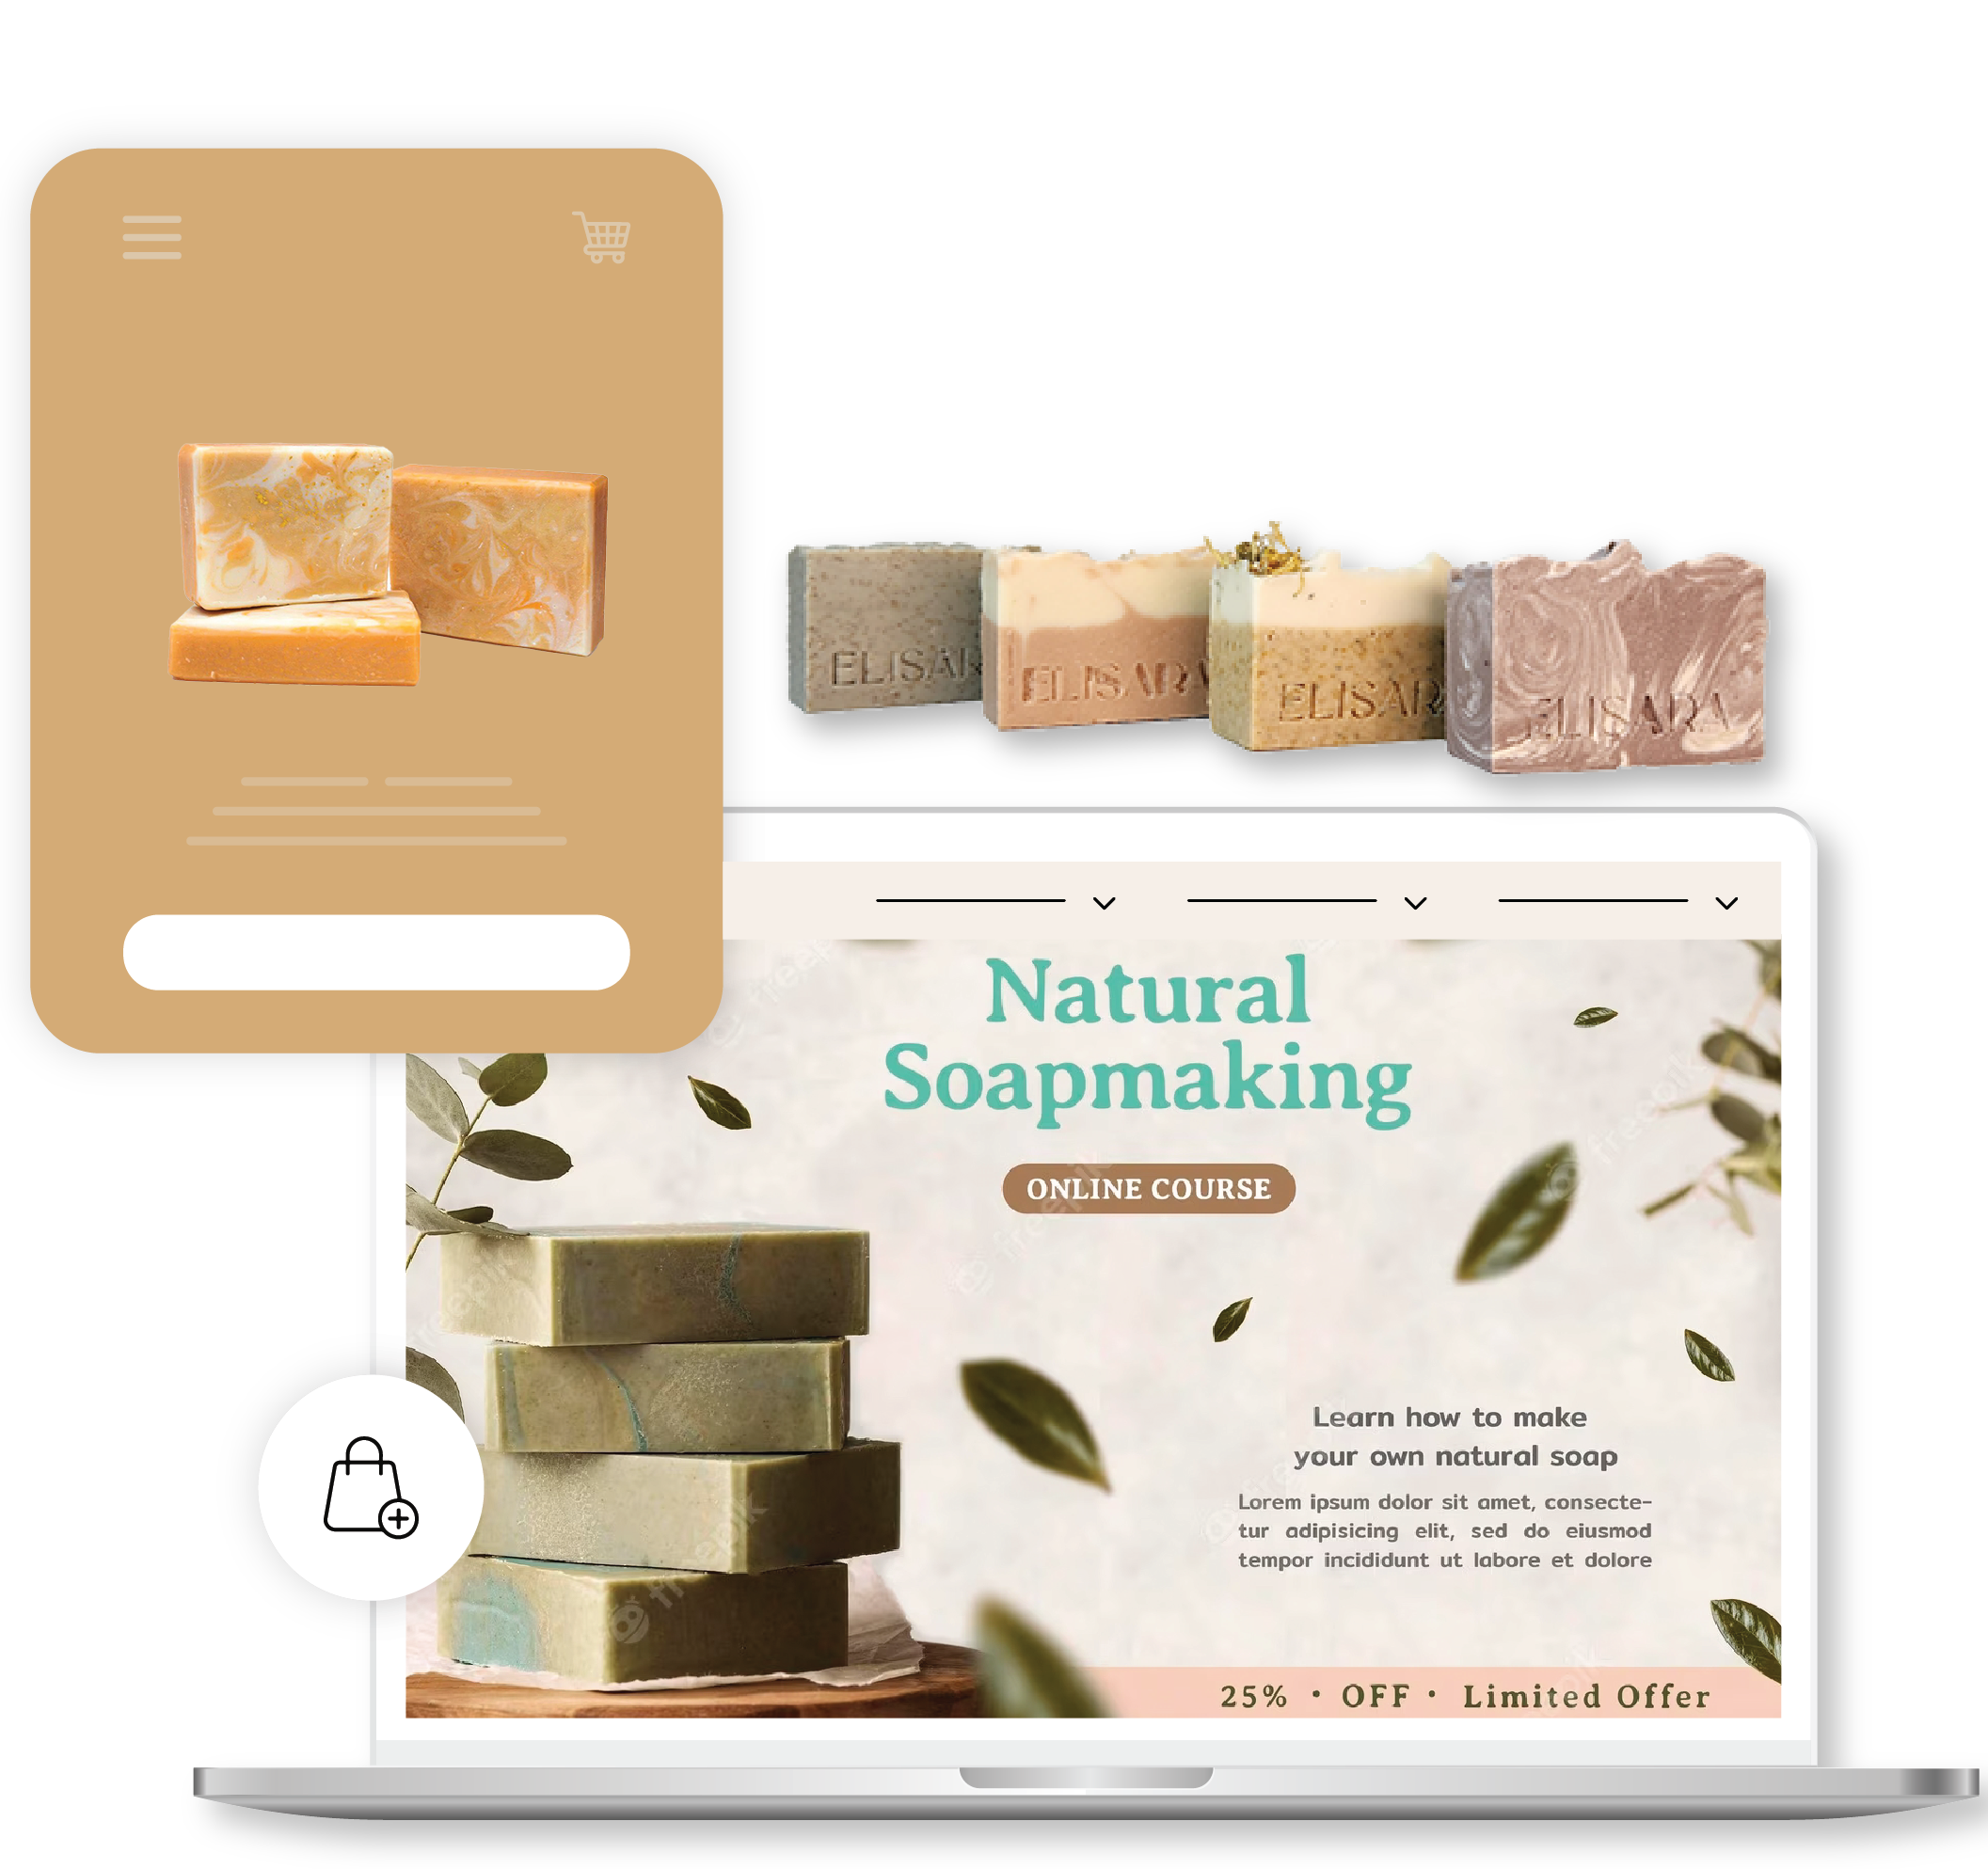 Sell soaps online